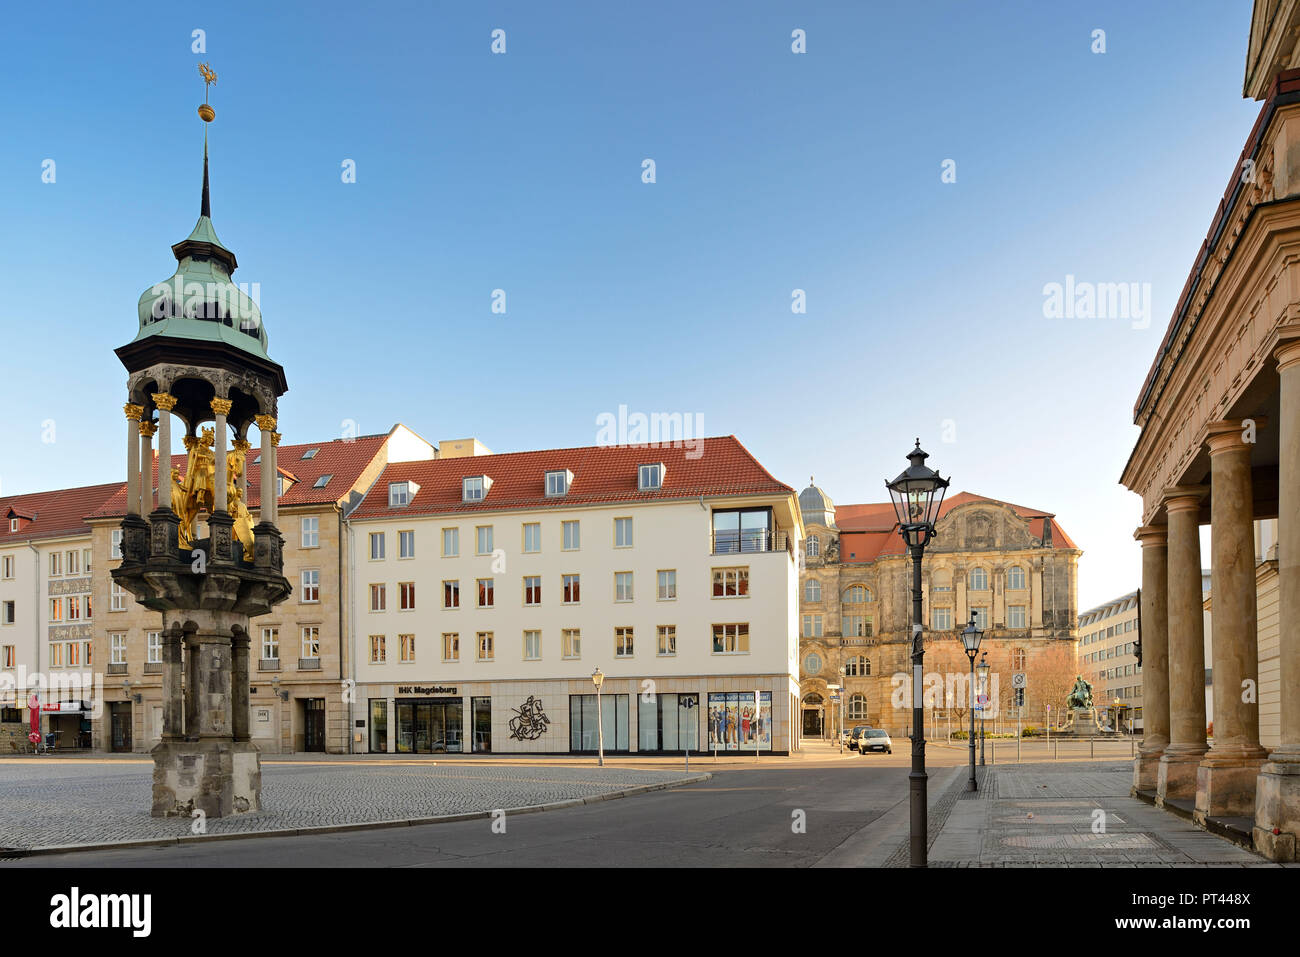 Germany, Saxony-Anhalt, Magdeburg, The Old Market, Market Square with the monument Magdeburger Reiter Stock Photo